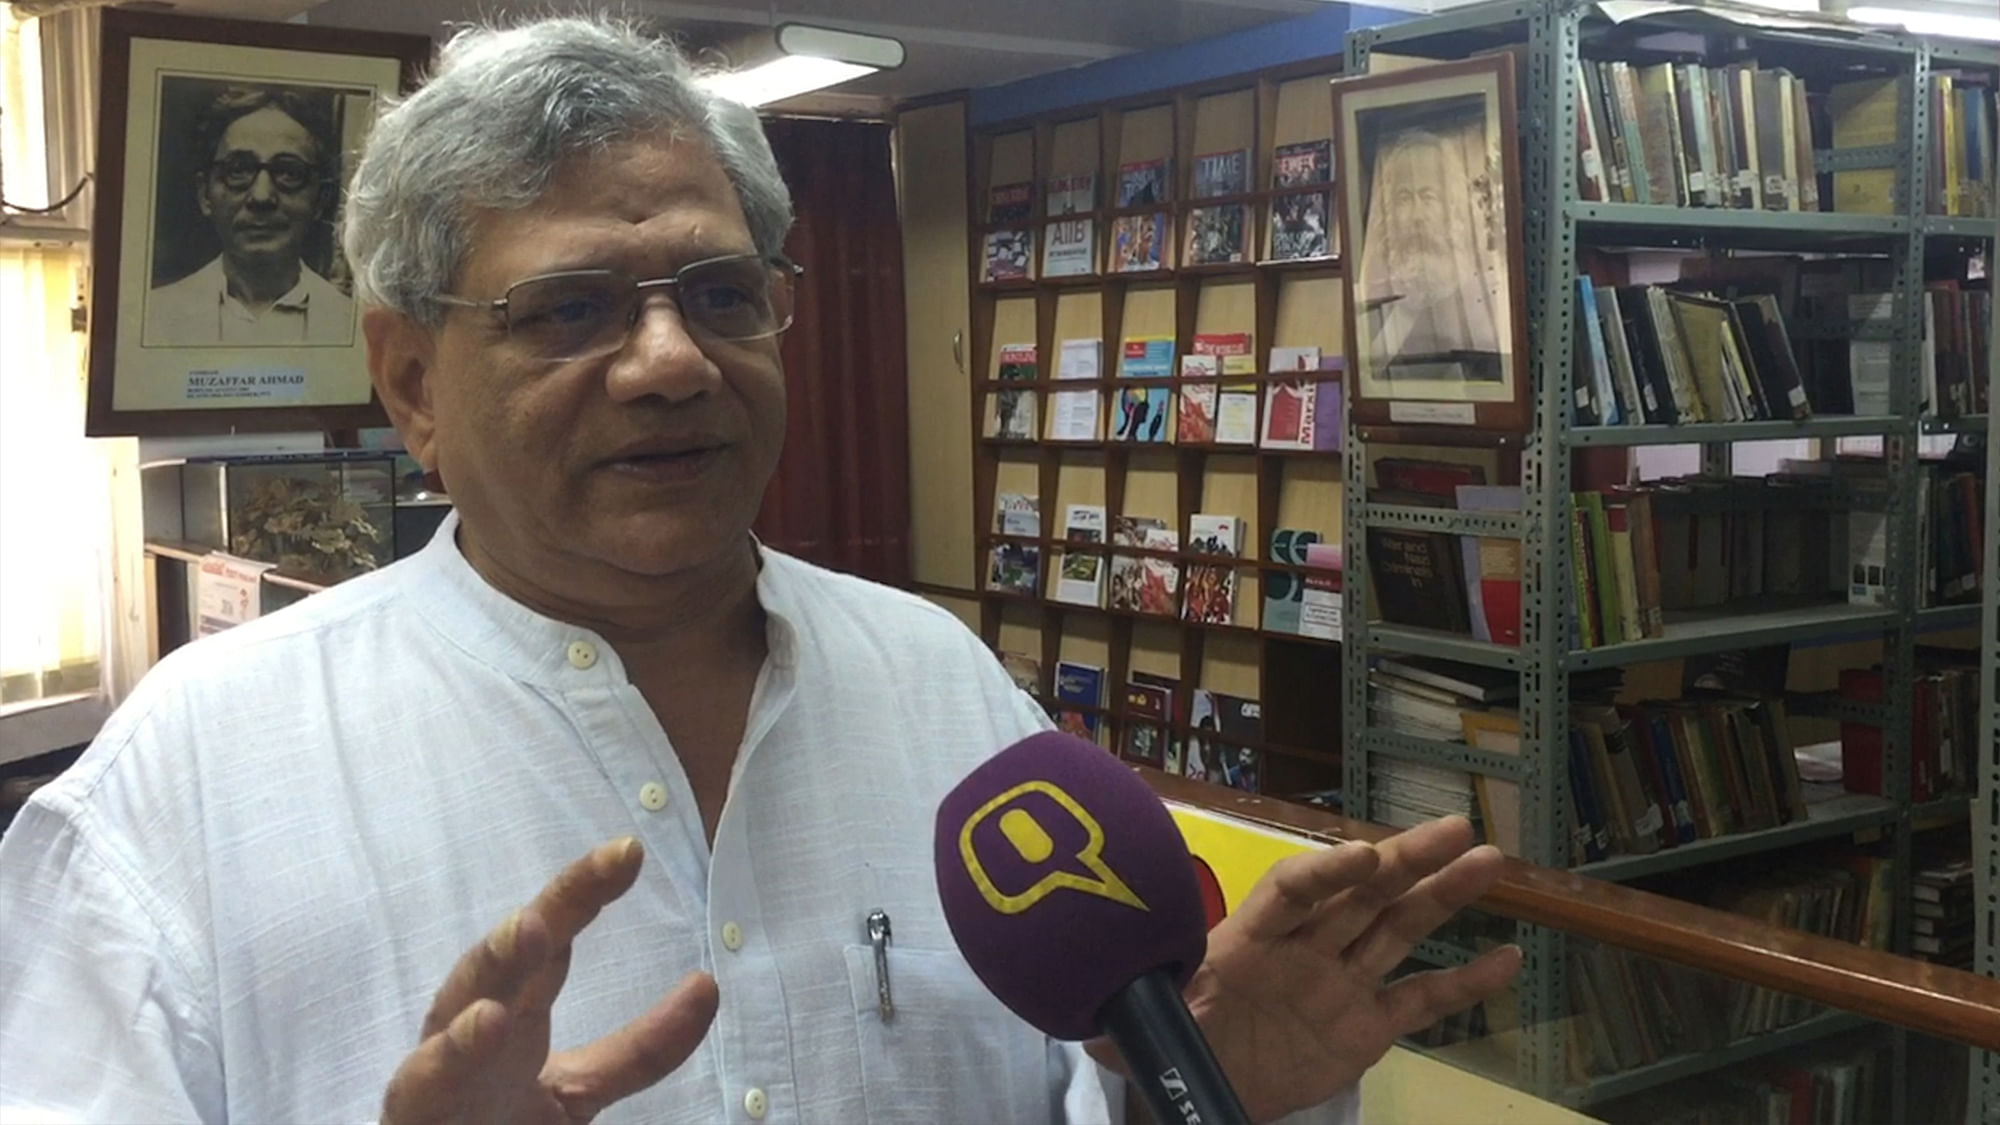 CPI(M) Sitaram Yechury insists that his party still has “irreconcilable differences” with the Congress and the alliance is actually something that came from the ground up. (Photo: <b>The Quint</b>)